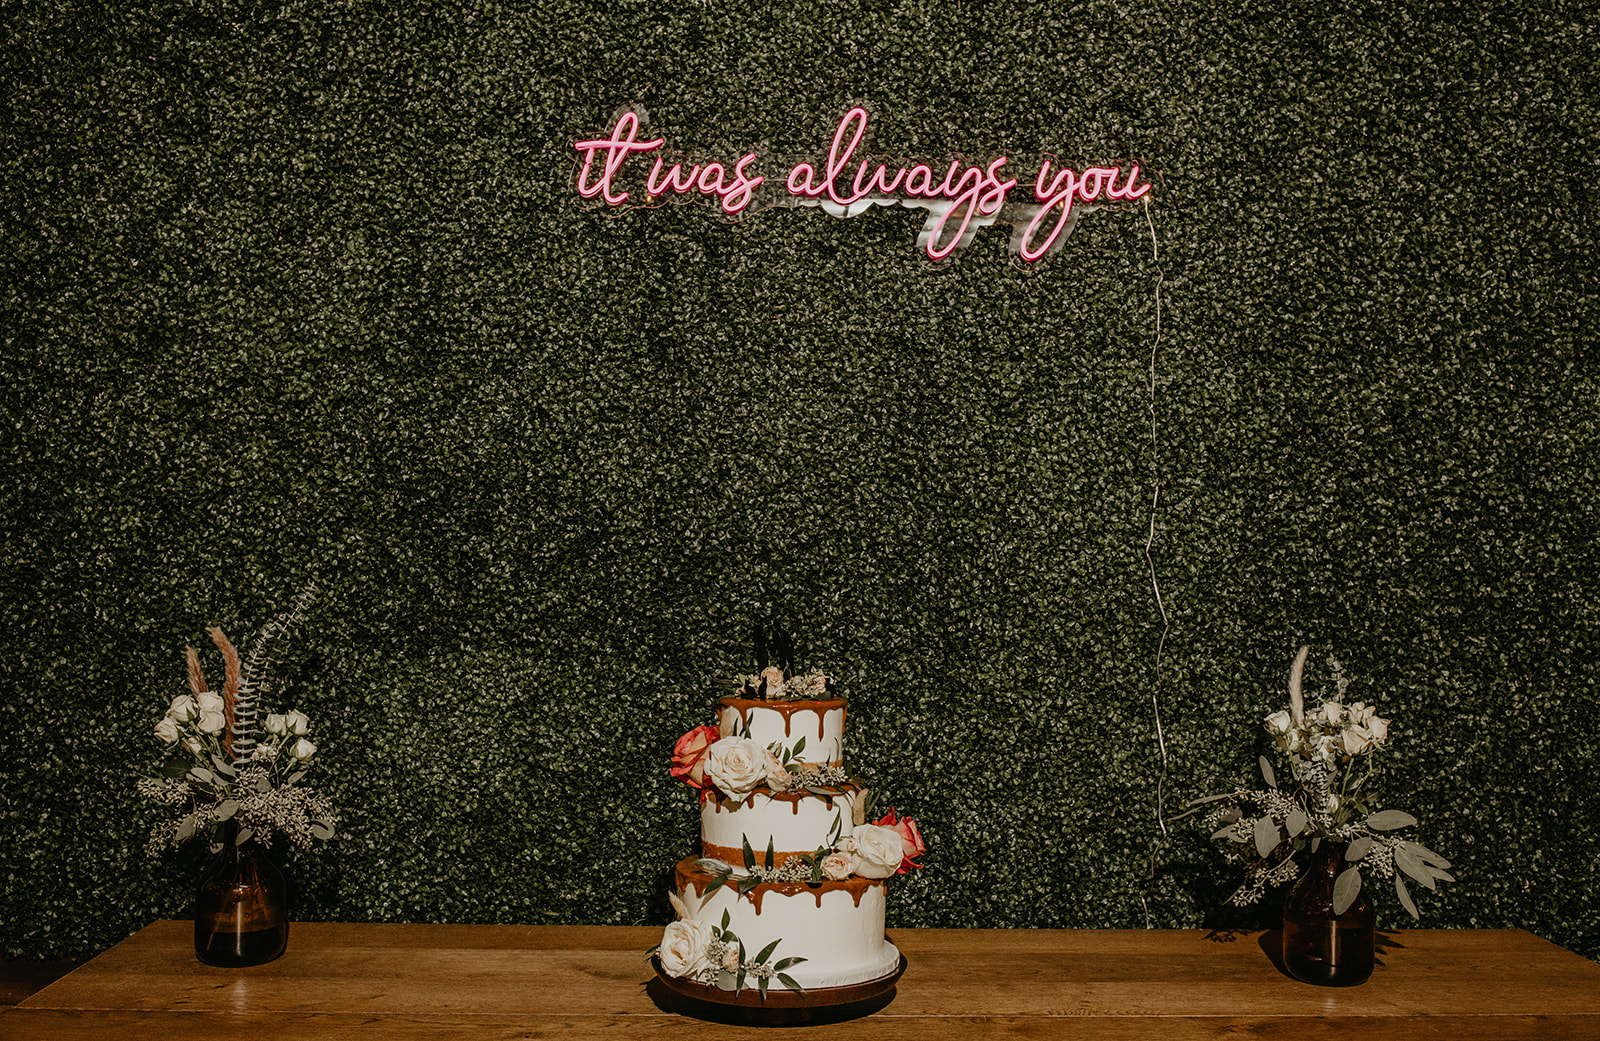 Industrial Layered Cake Neon Sign Wedding Venue